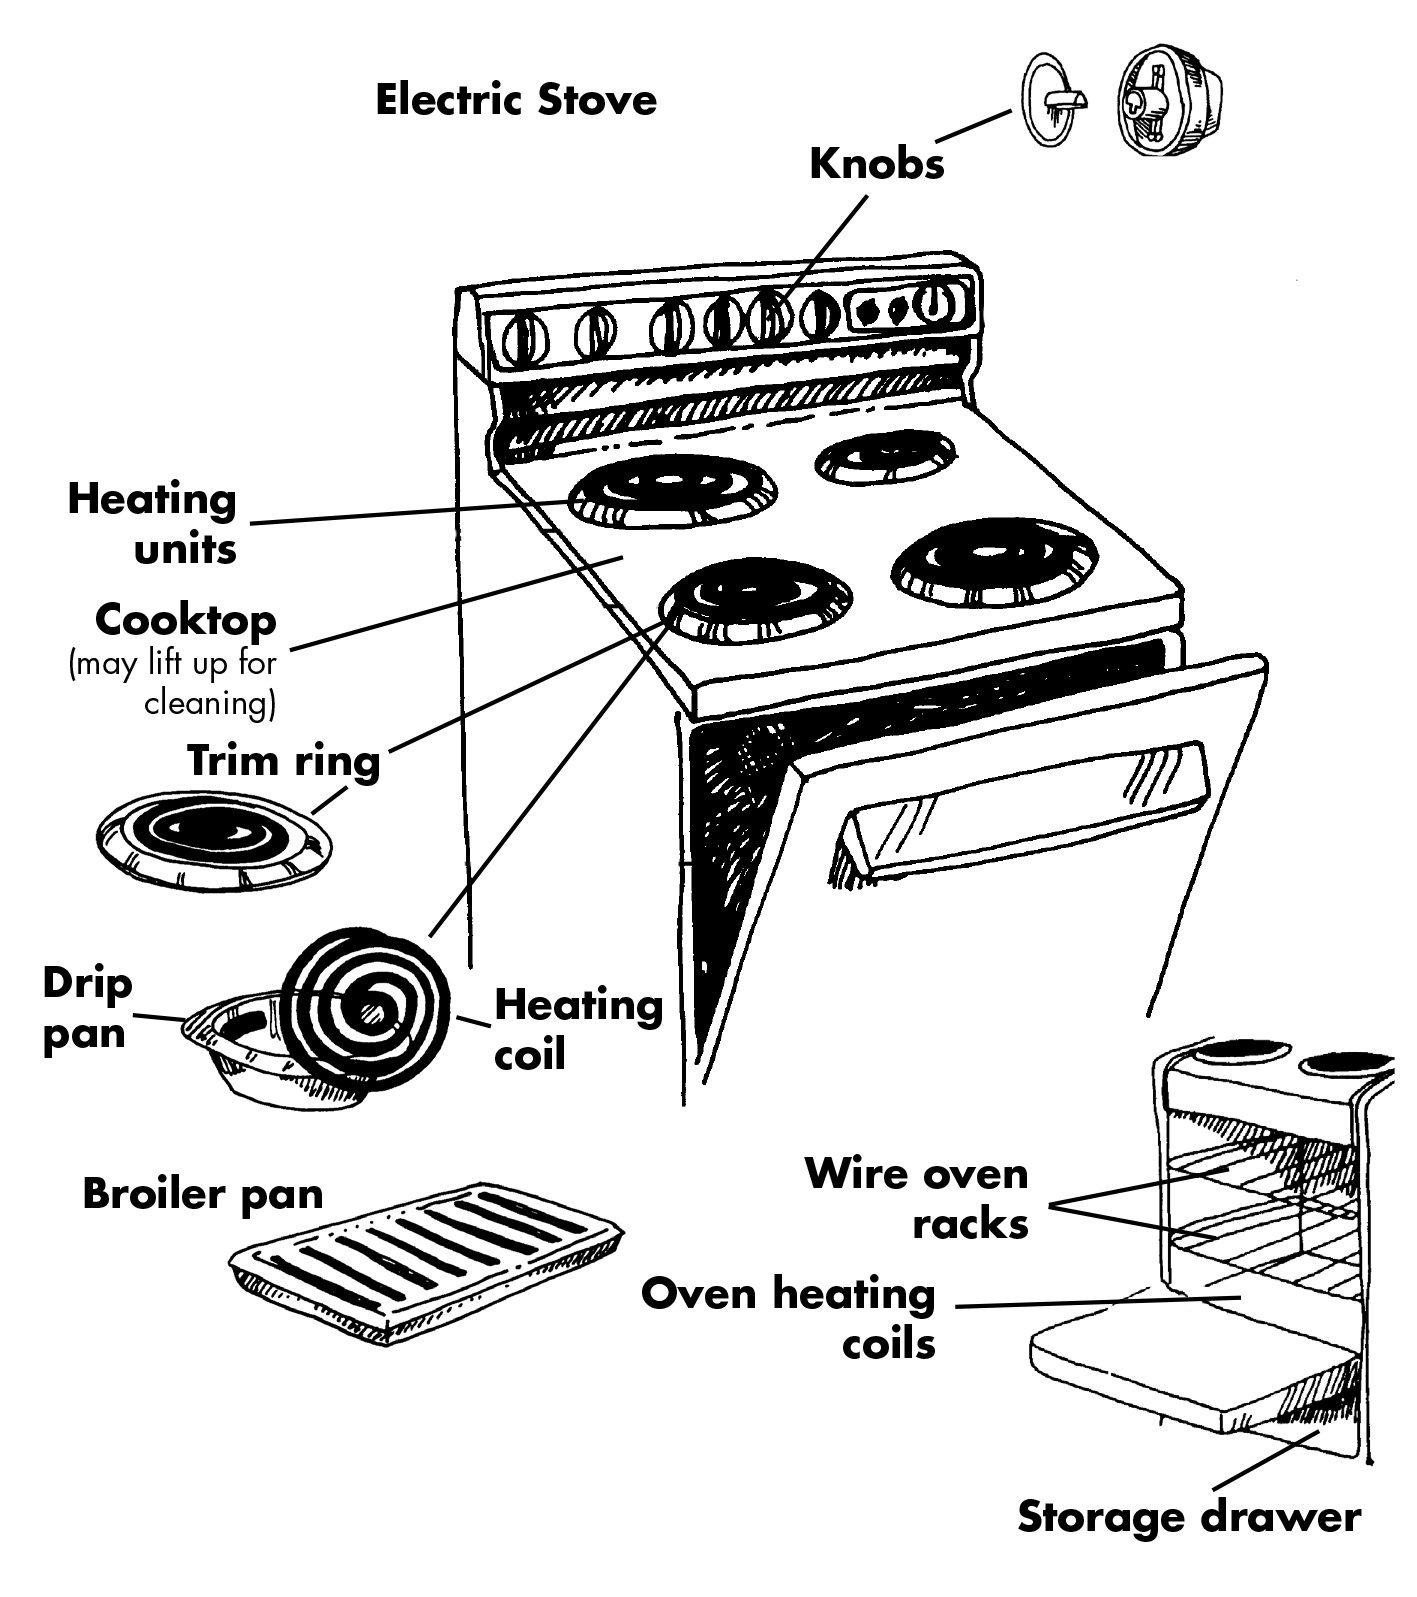 Stove with parts illustrated